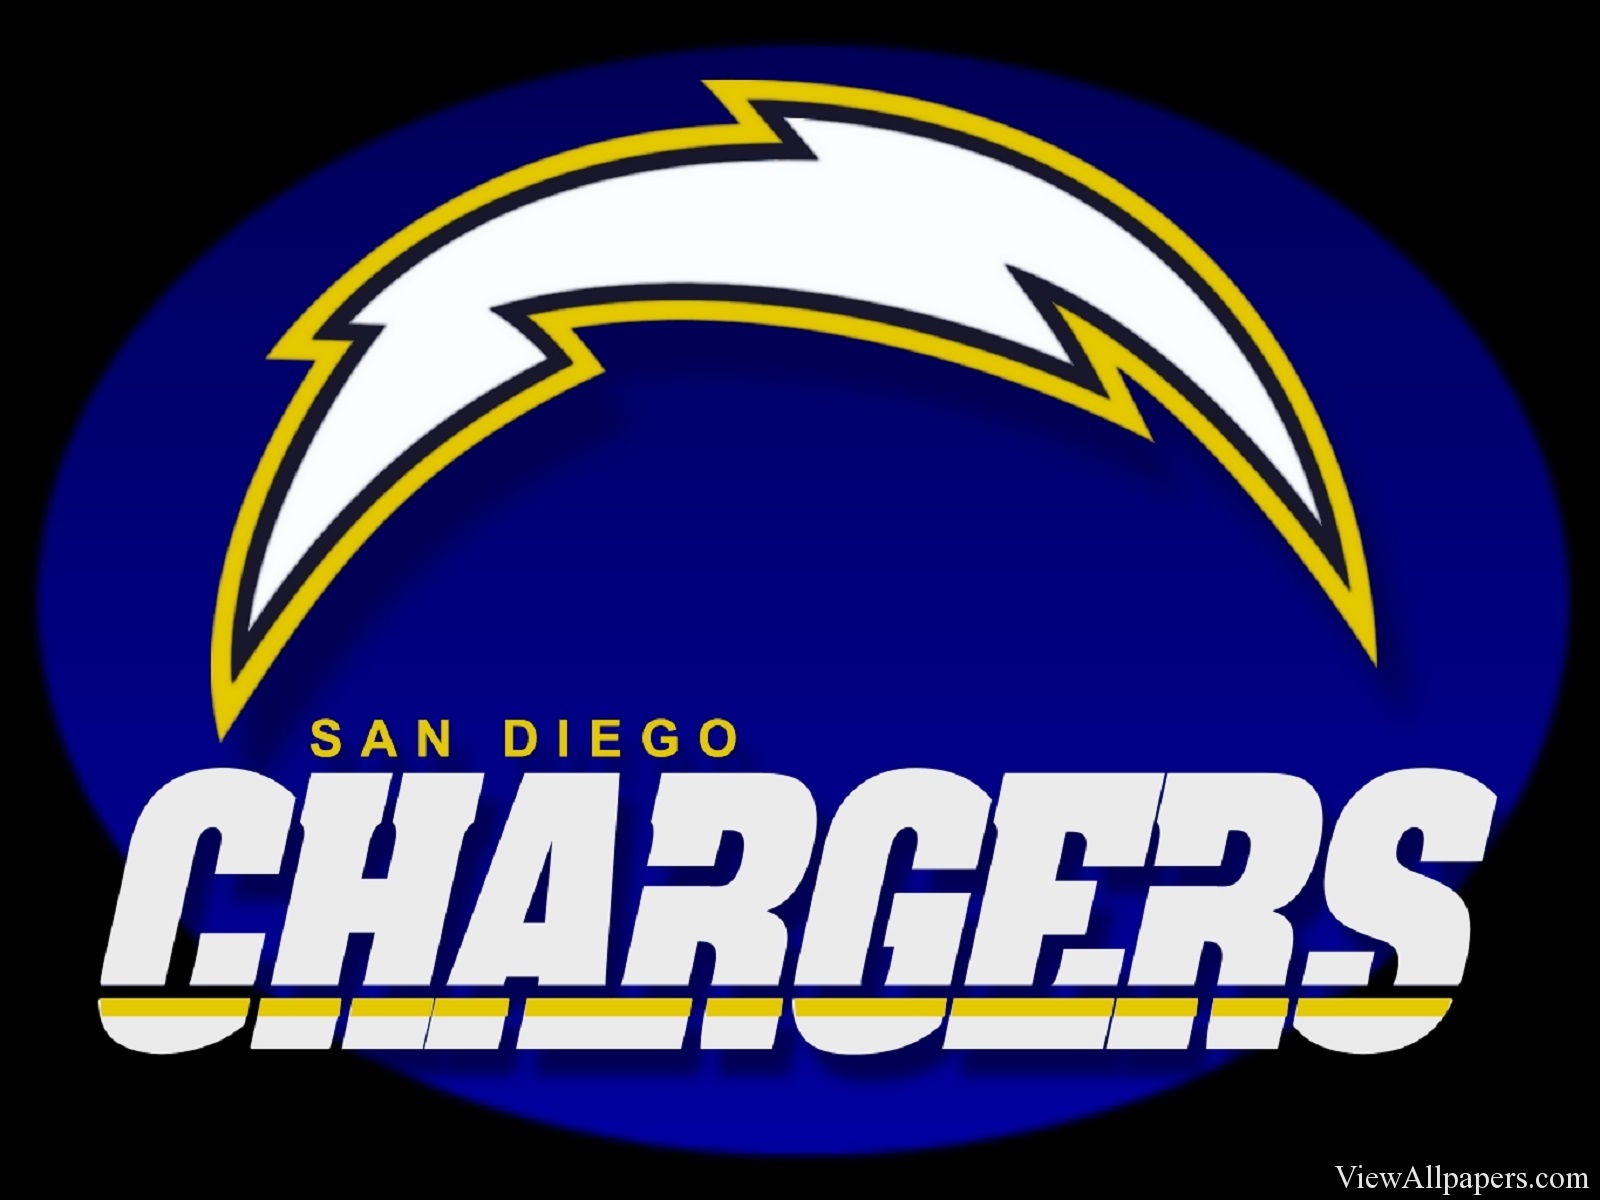 San Diego Chargers Logo HD Resolution Wallpaper Free download San